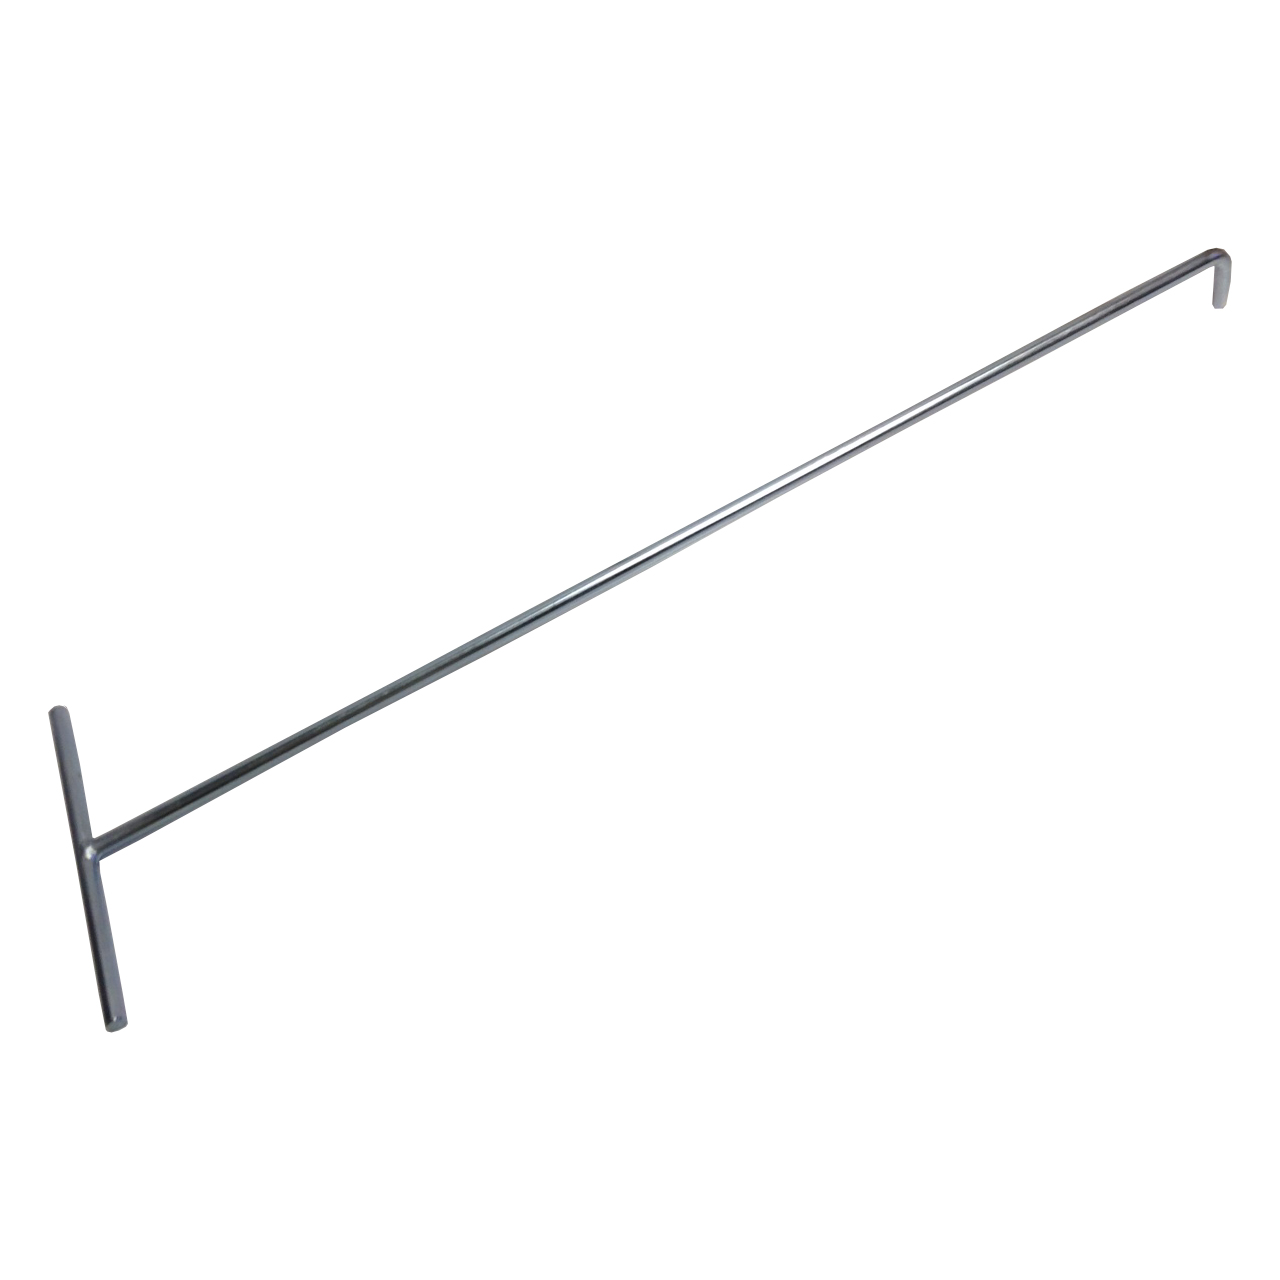 Manhole Hooks, Manhole Cover Lifters for Sewer Cleaning